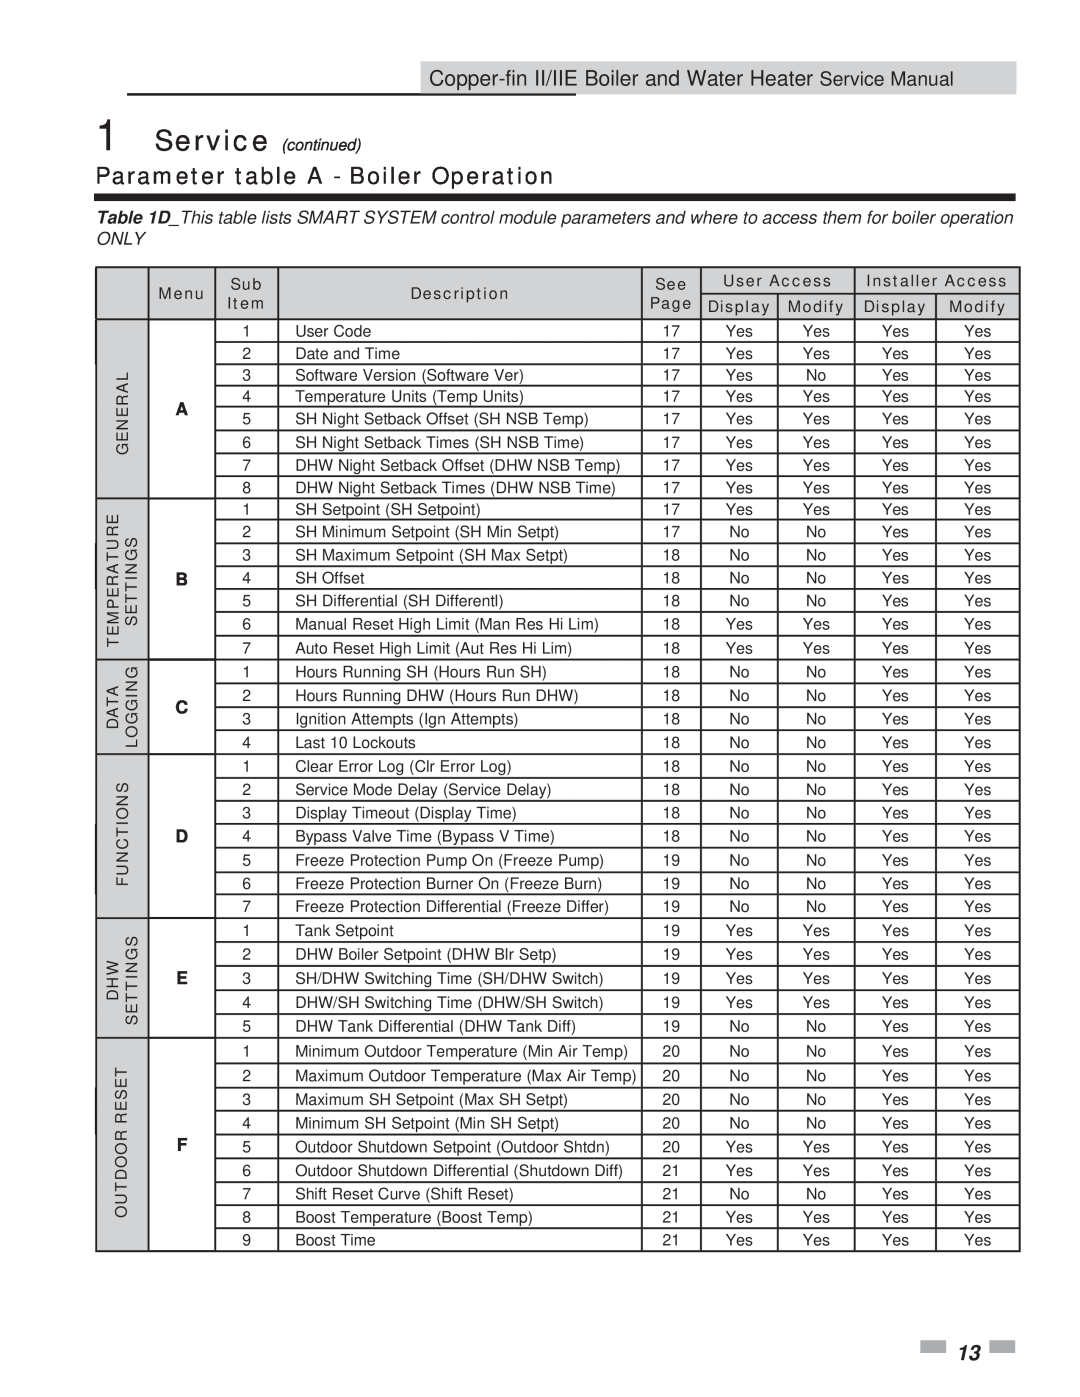 Lochinvar 402, 2072 service manual Parameter table A - Boiler Operation, Only, Service continued 